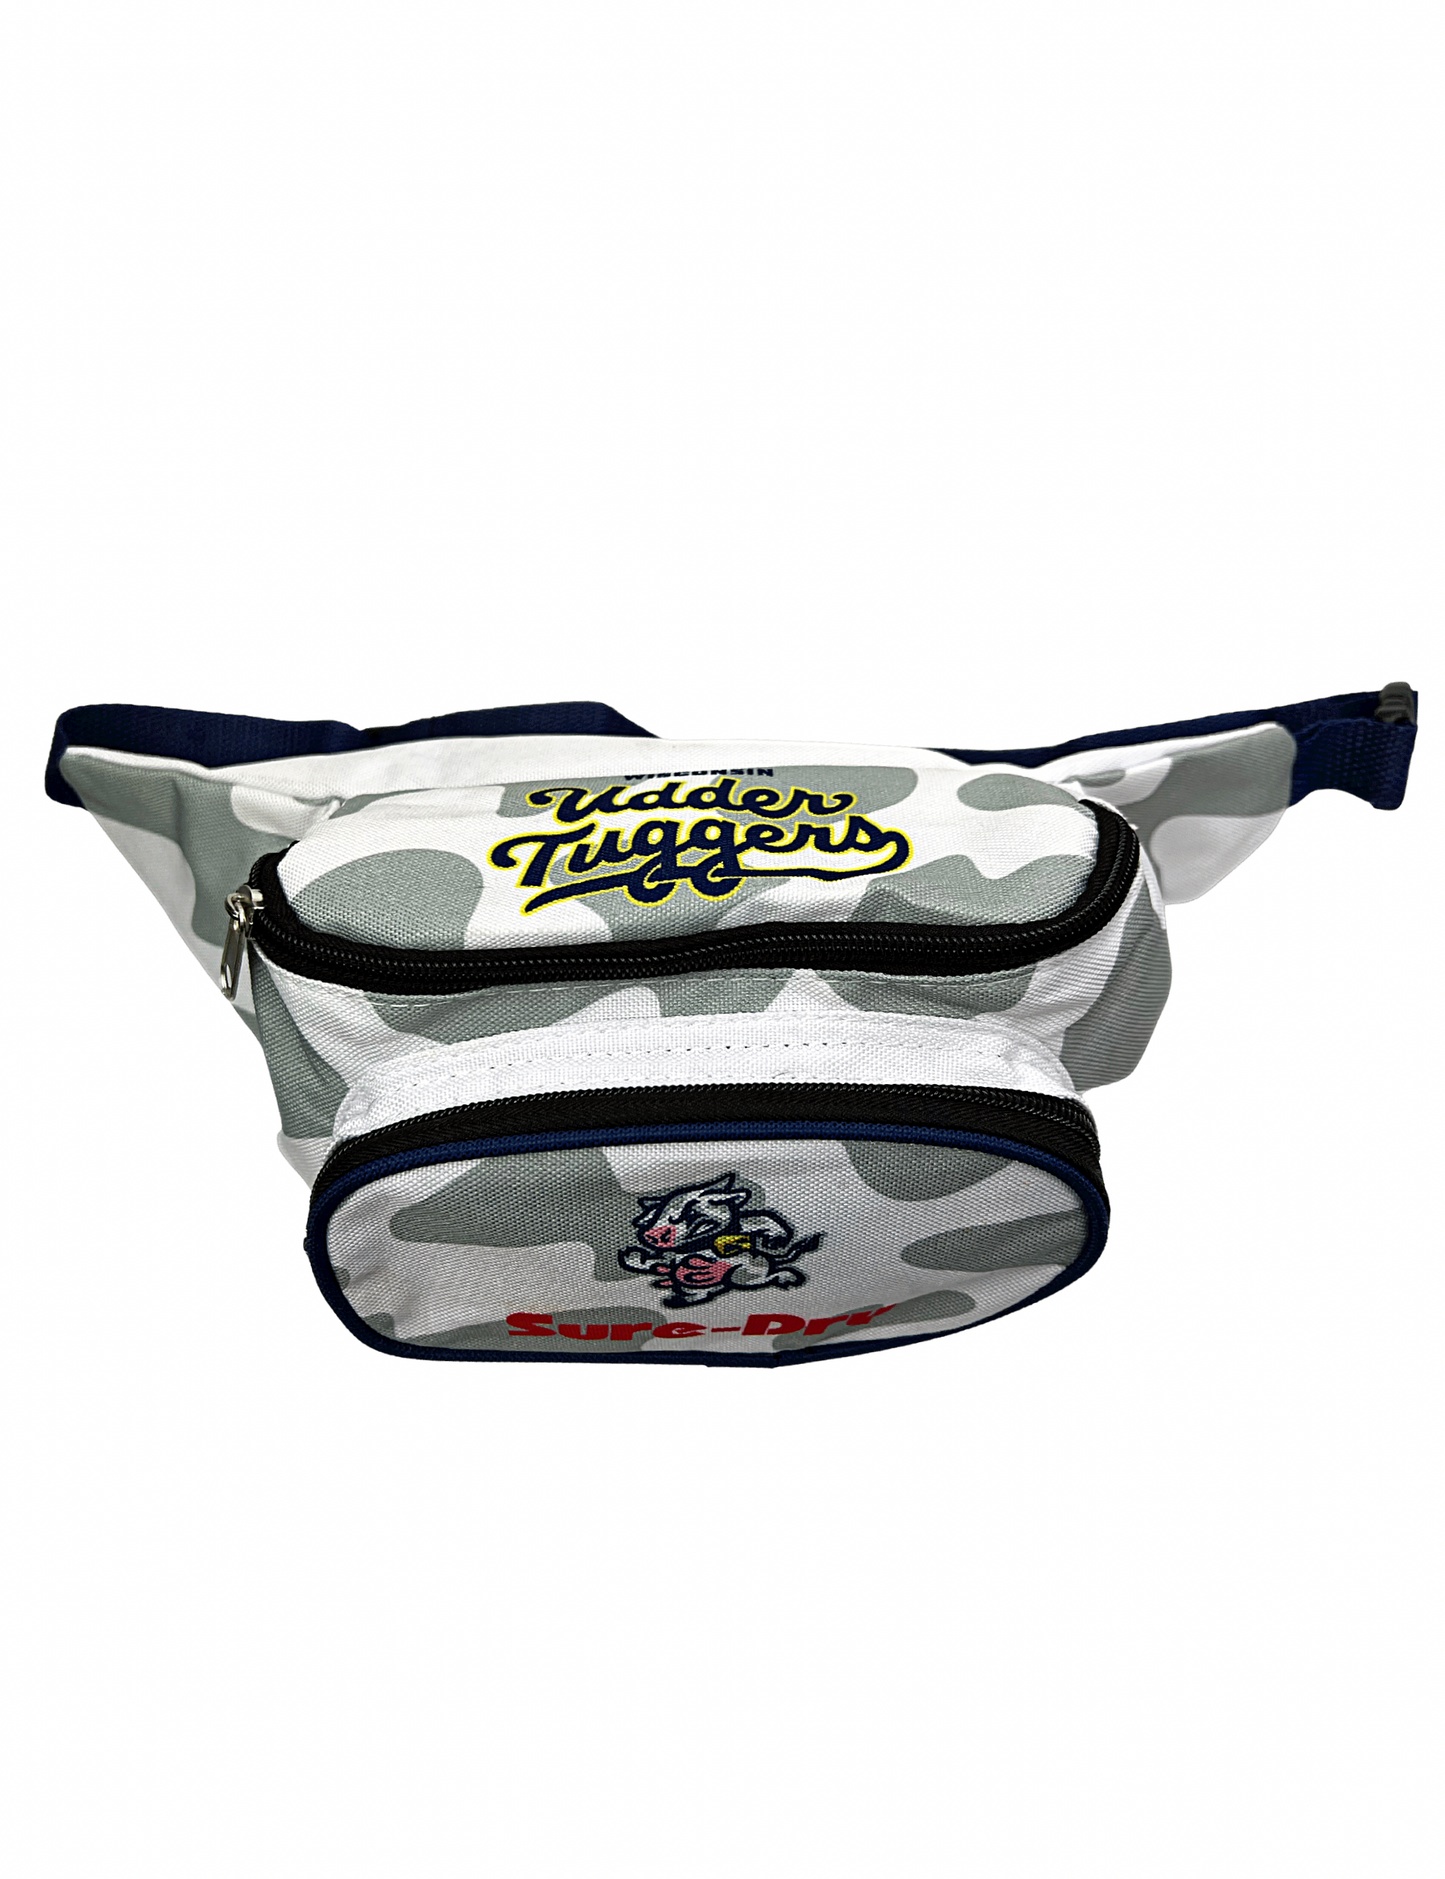 Cow Print Wisconsin Udder Tuggers Fanny Pack